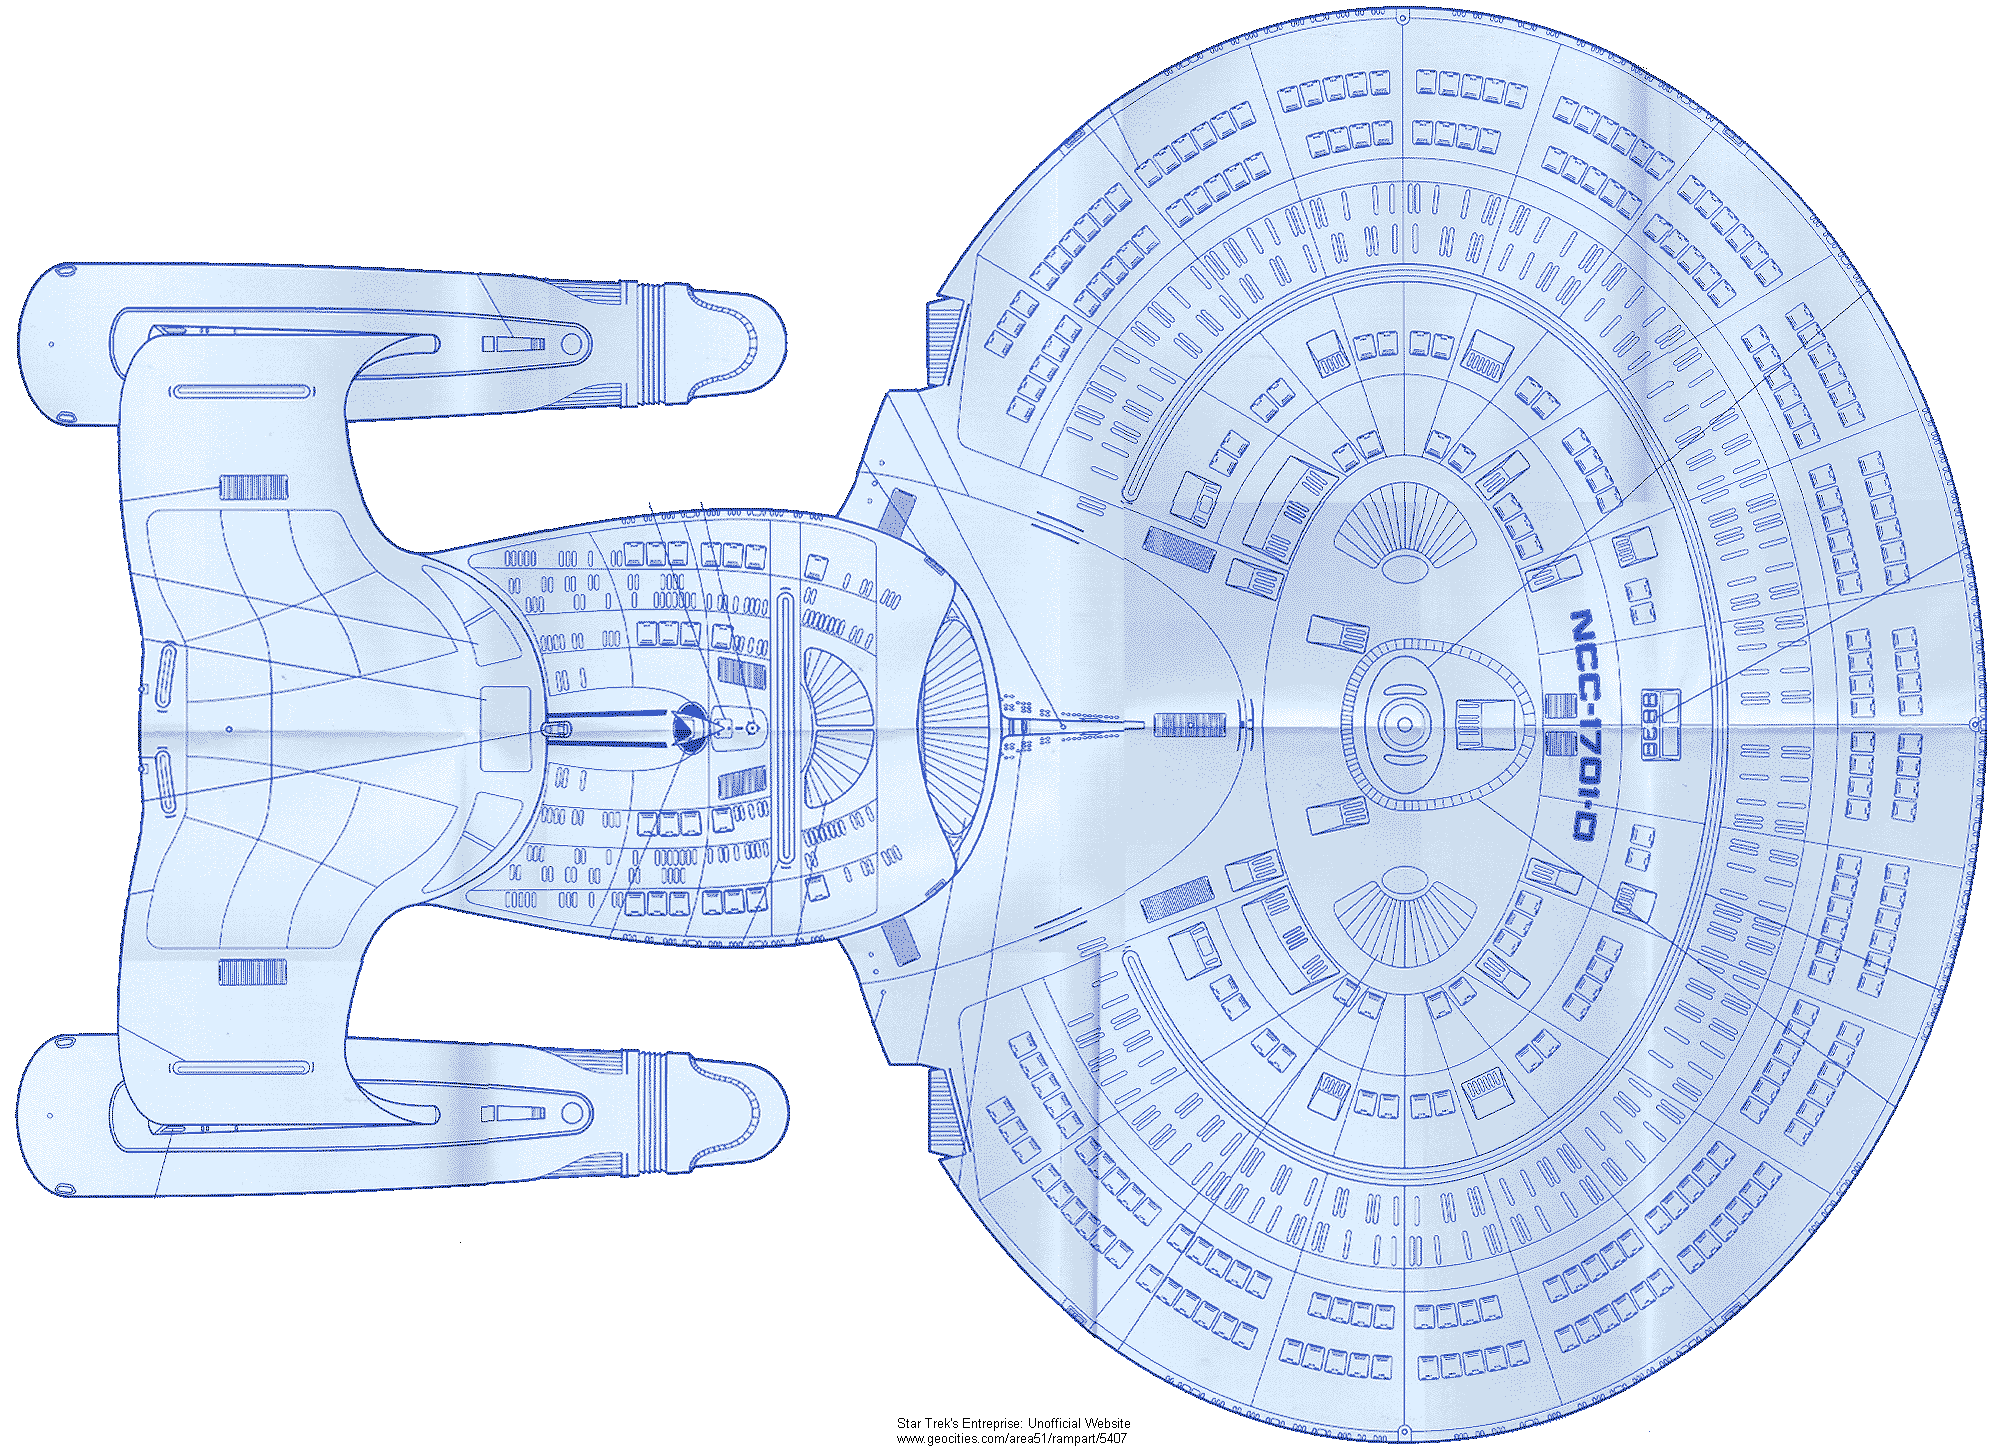 Ventral Surface Plan View